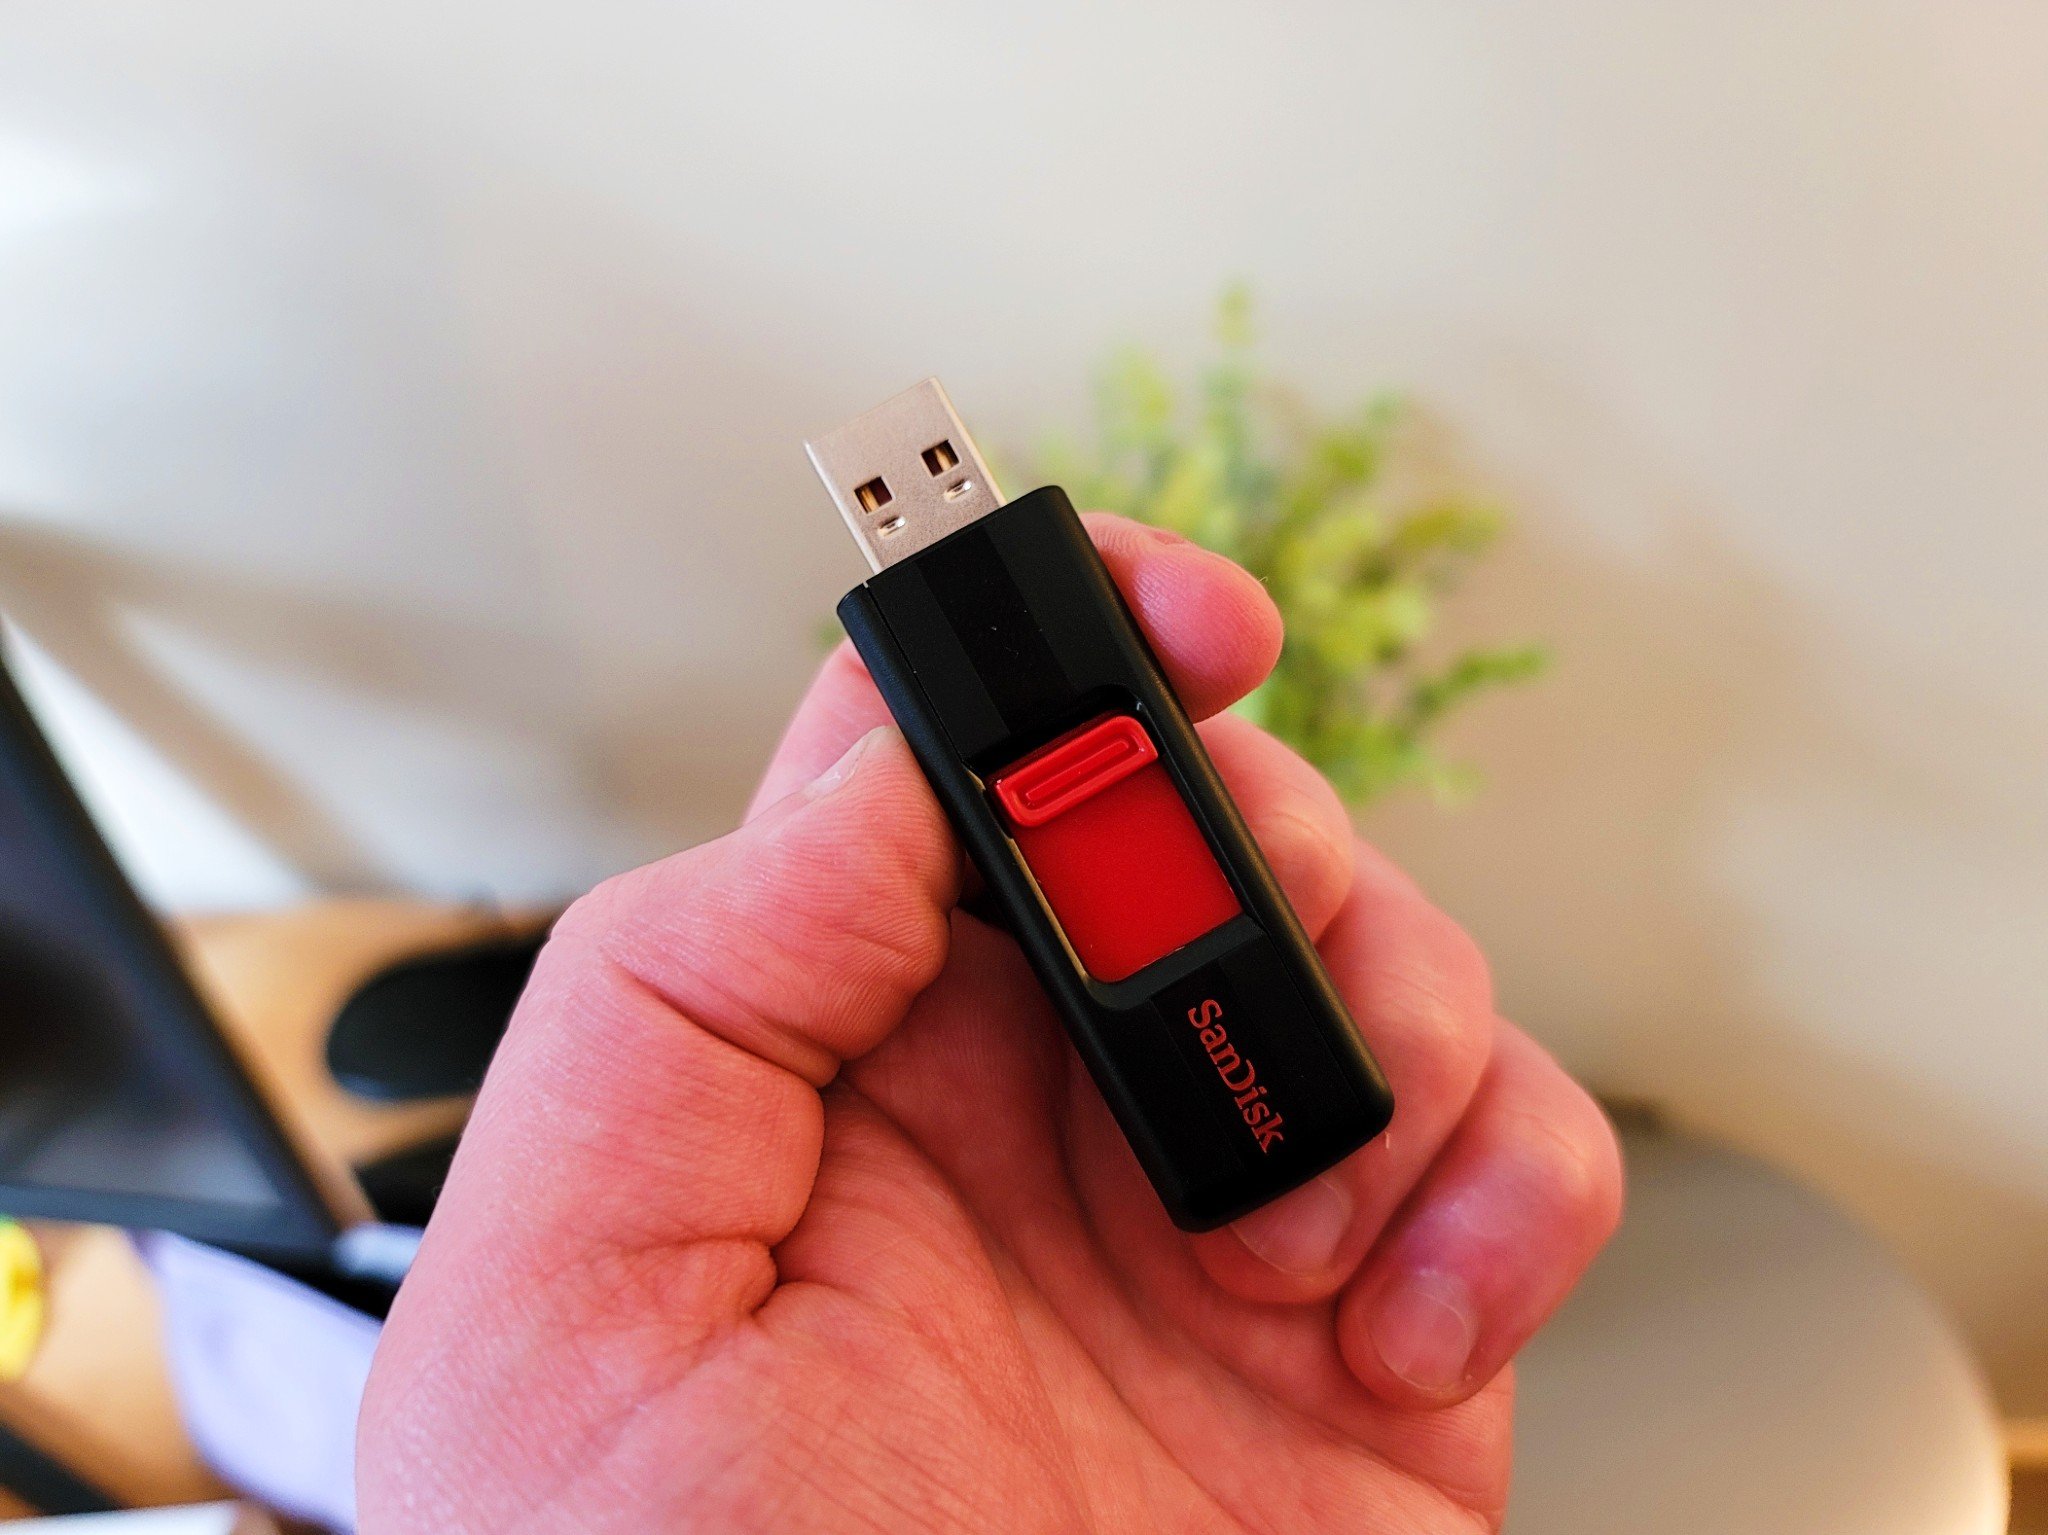 SanDisk Cruzer USB review: Slow speeds this reliable drive a no-go for most | Windows Central